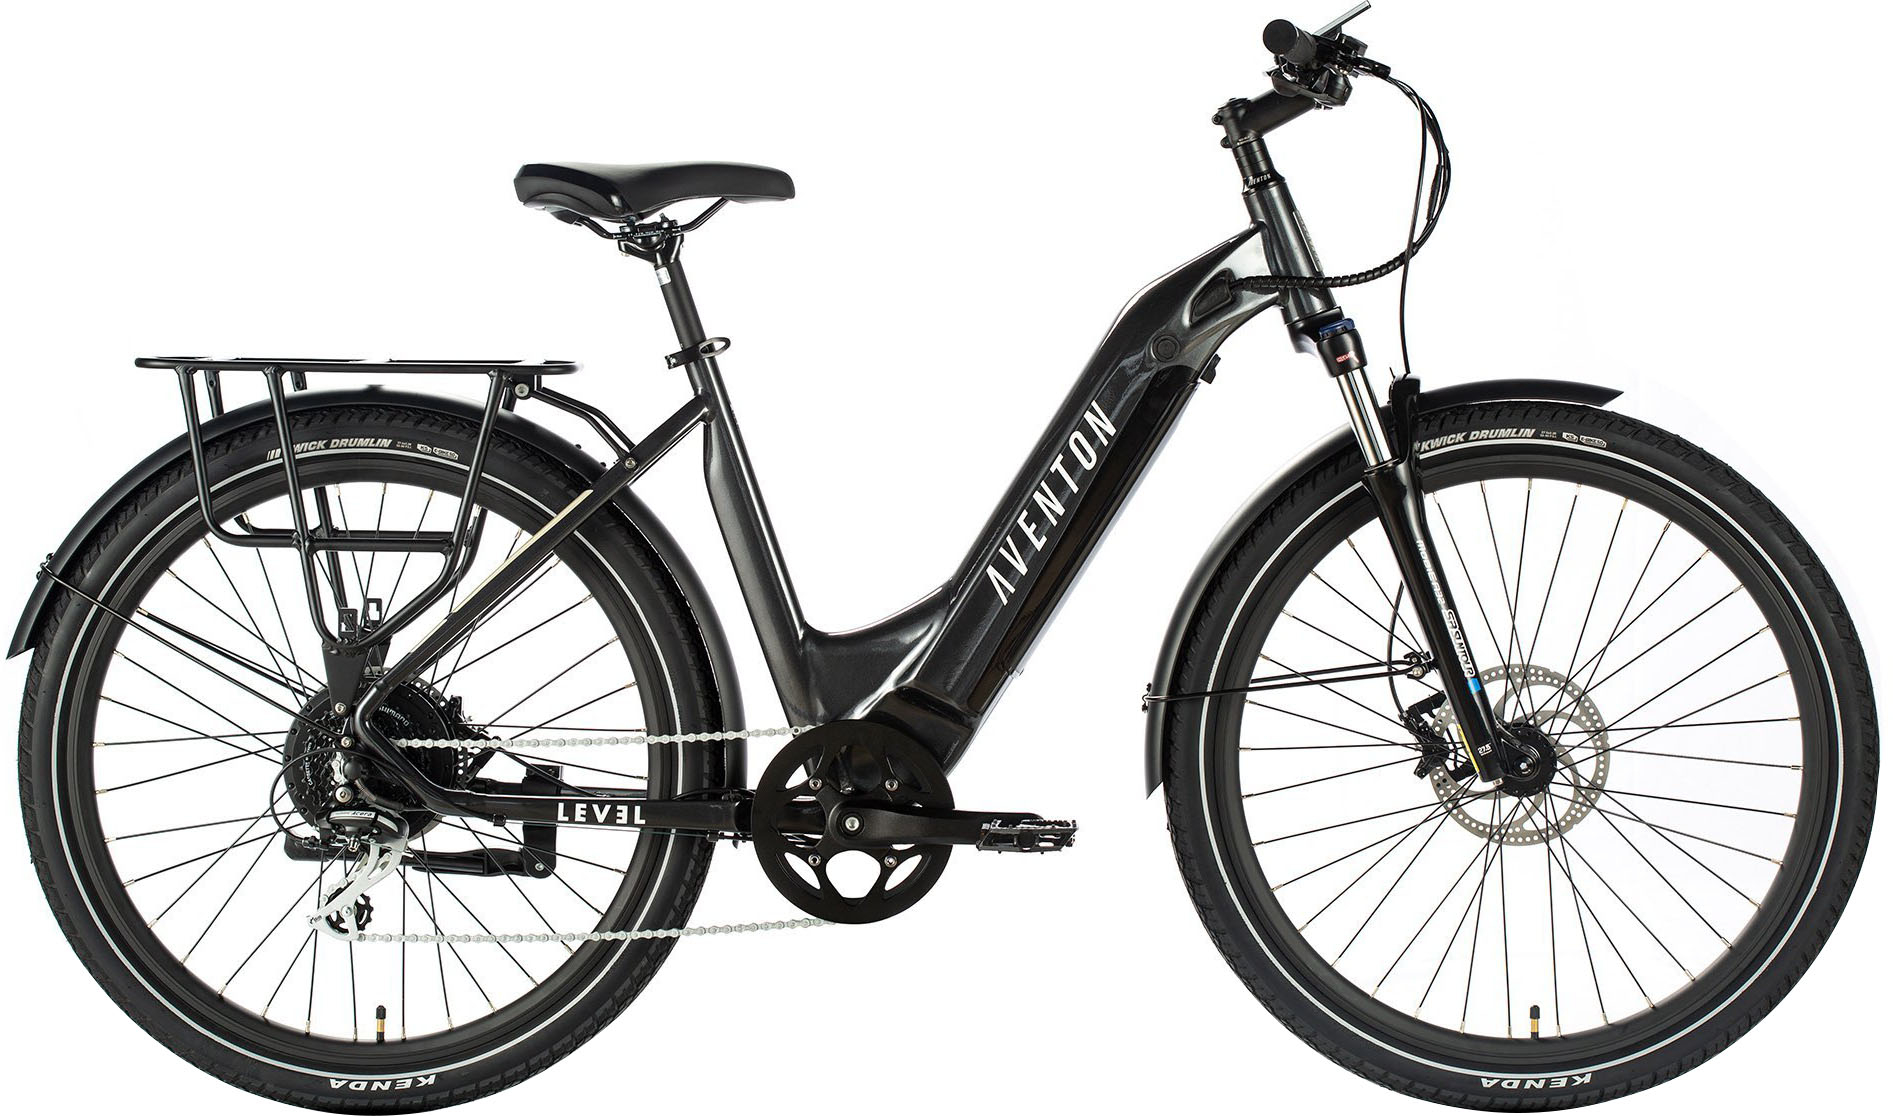 Angle View: Aventon - Level Commuter Step-Through Ebike w/ 40 mile Max Operating Range and 28 MPH Max Speed - Earth Grey